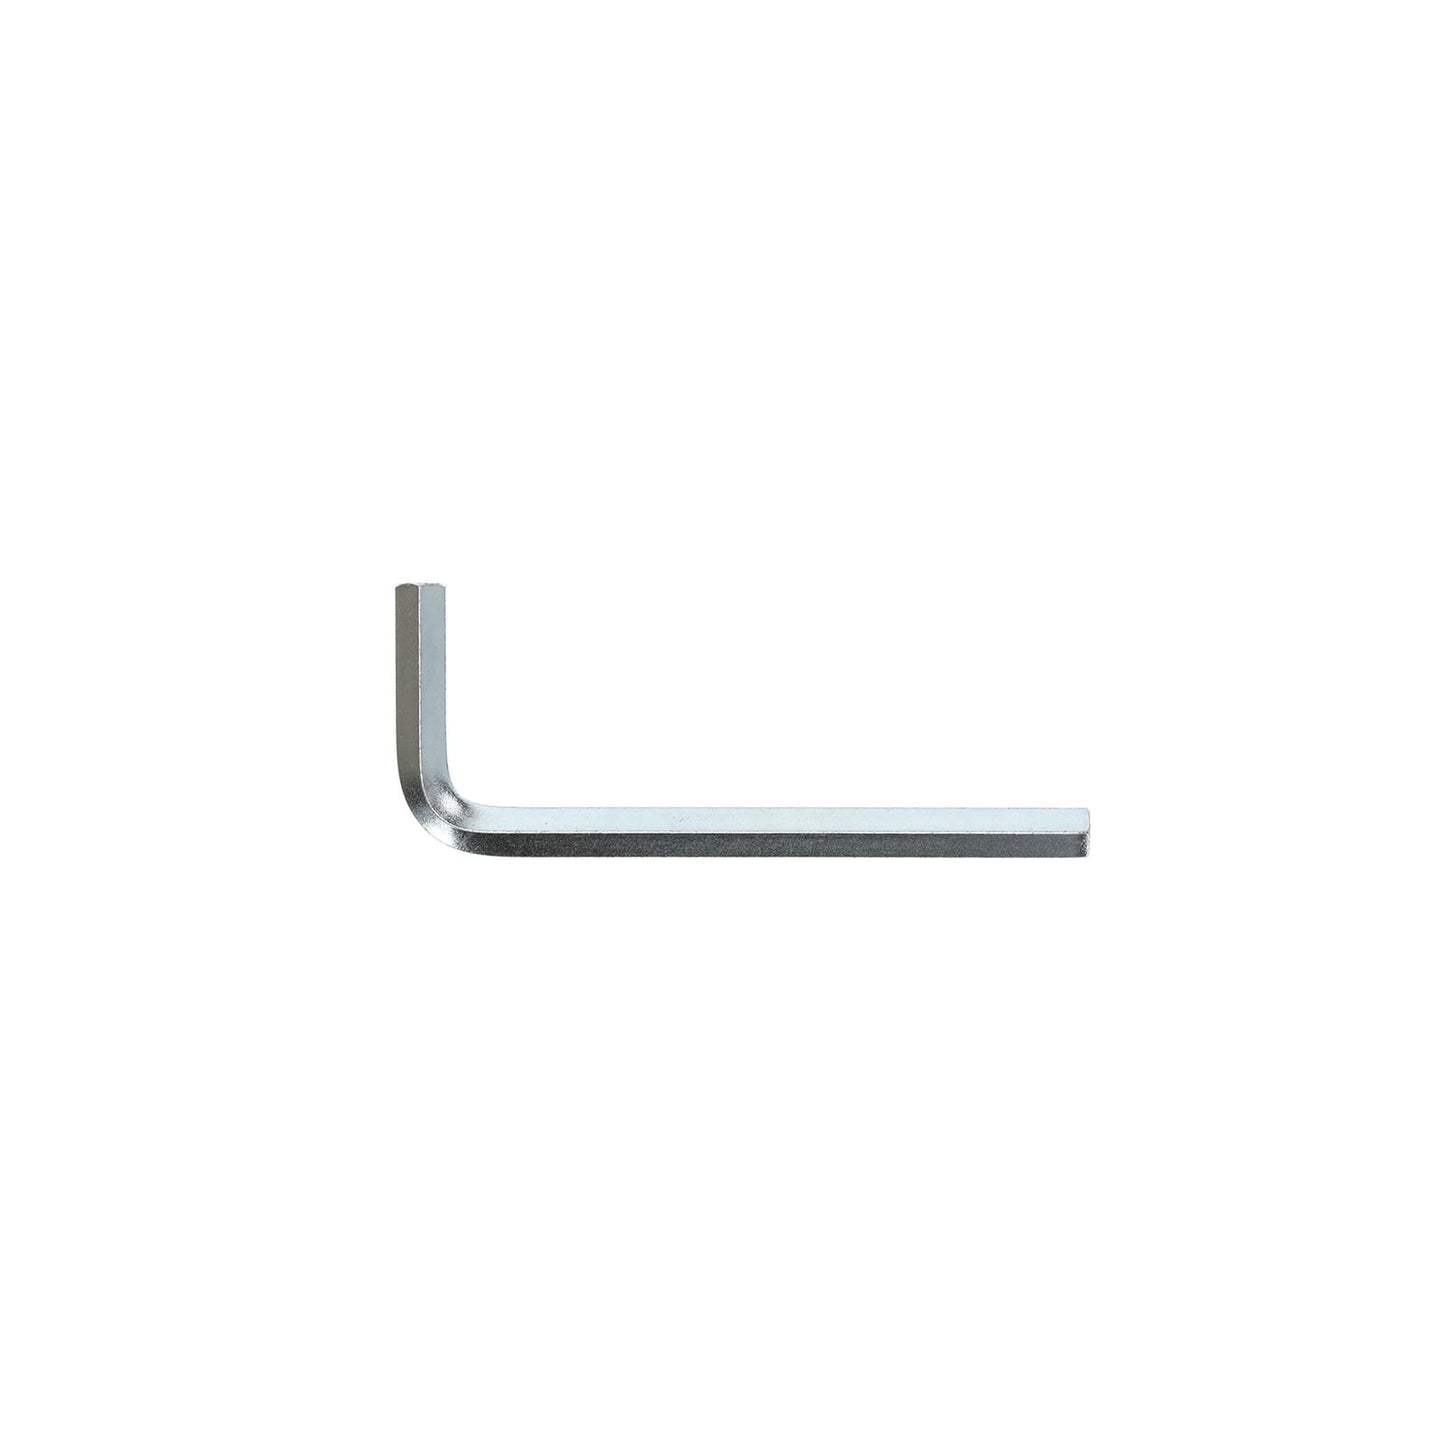 GEDORE 42 8 - Angled Allen Key 8 mm (6341070)